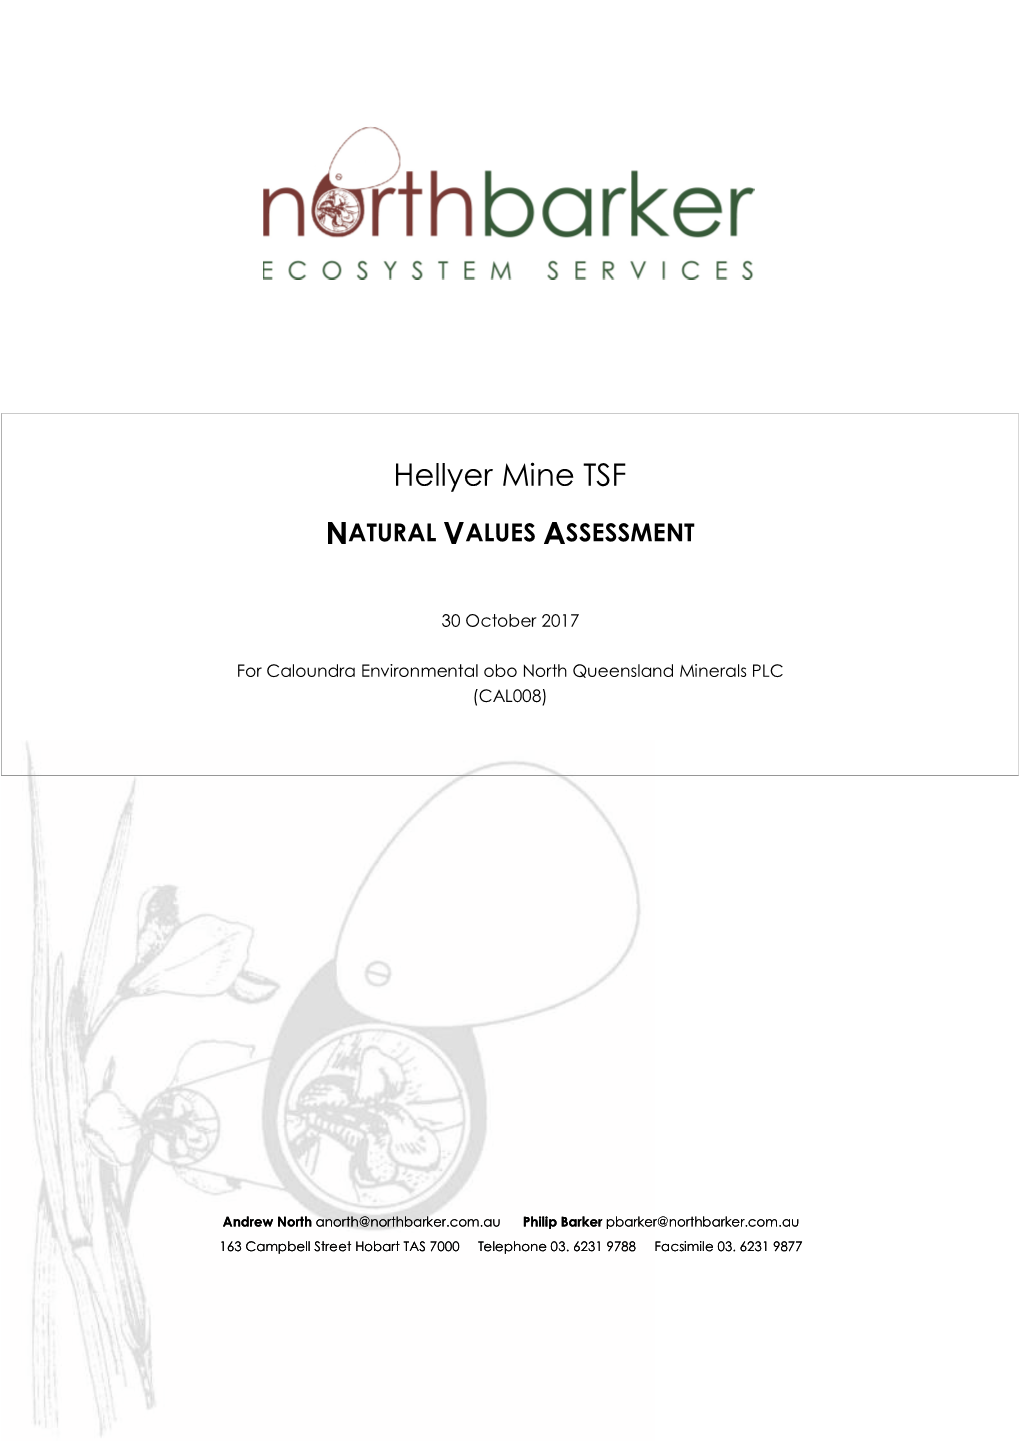 Hellyer Mine TSF NATURAL VALUES ASSESSMENT